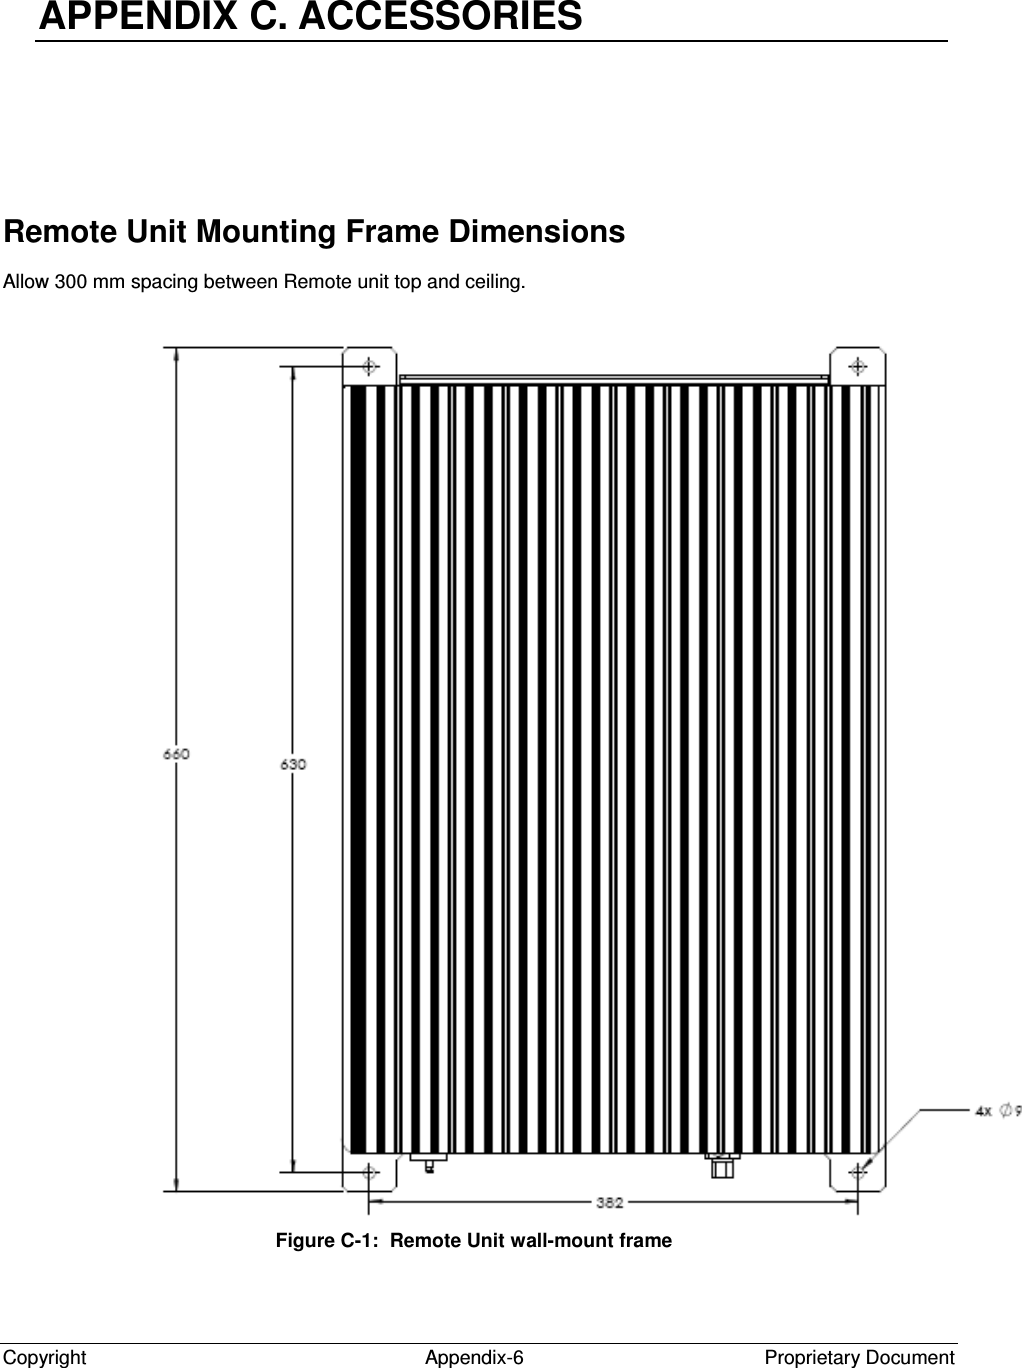  Copyright  Appendix-6  Proprietary Document  APPENDIX C. ACCESSORIES  Remote Unit Mounting Frame Dimensions Allow 300 mm spacing between Remote unit top and ceiling.  Figure C-1:  Remote Unit wall-mount frame  